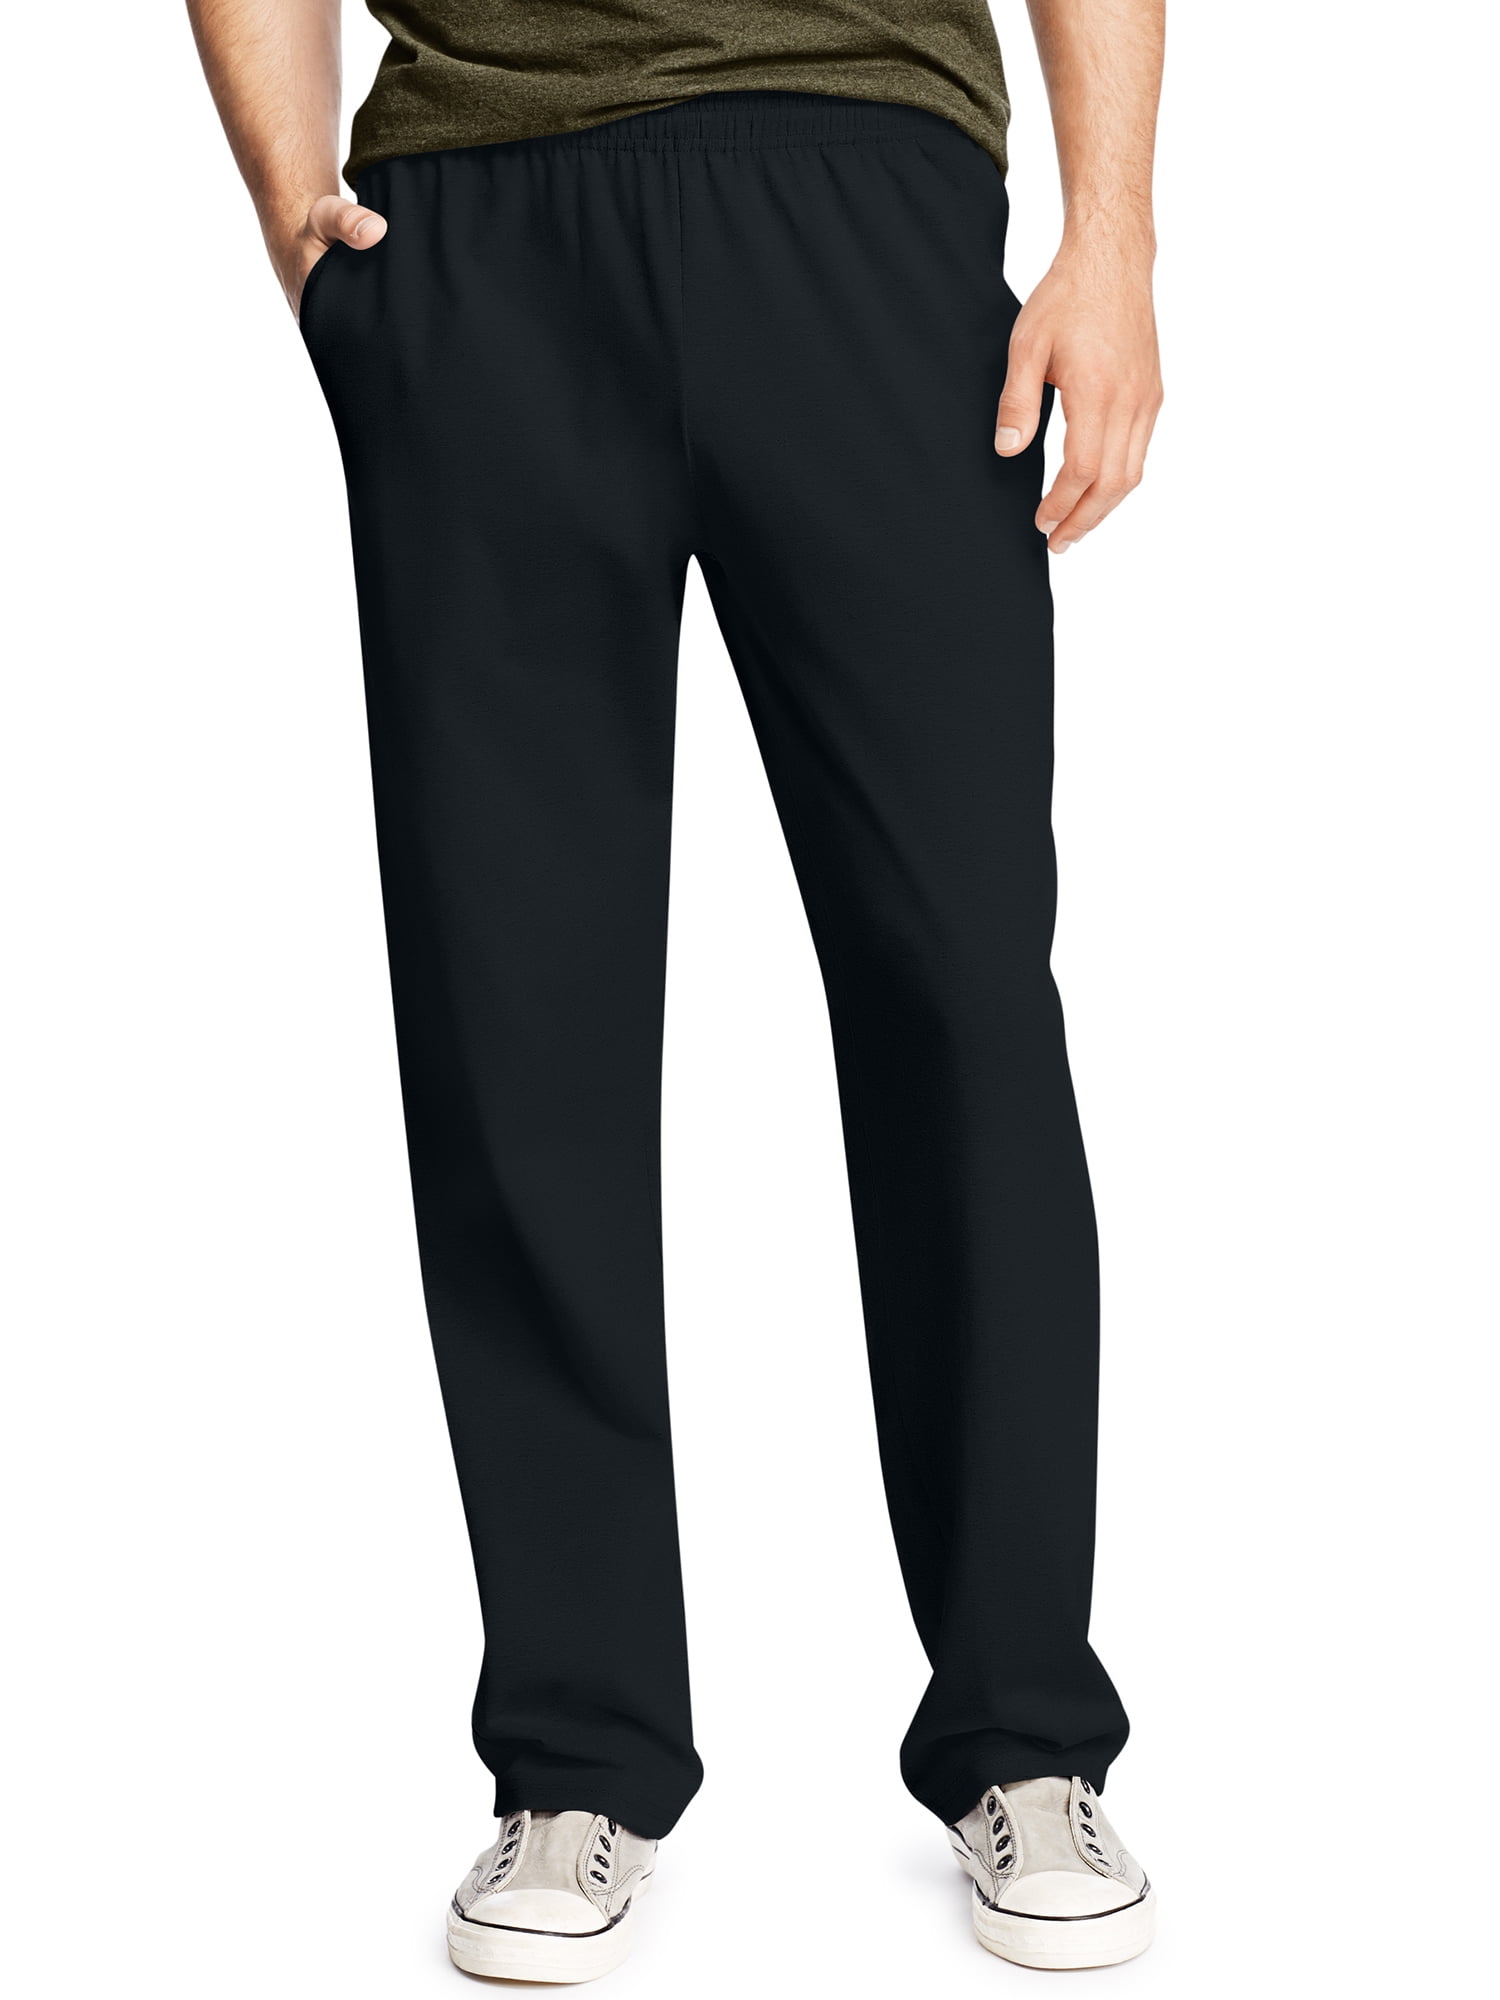 Hanes - Hanes Men's and Big Men's X-Temp Jersey Pocket Pant, up to Size ...